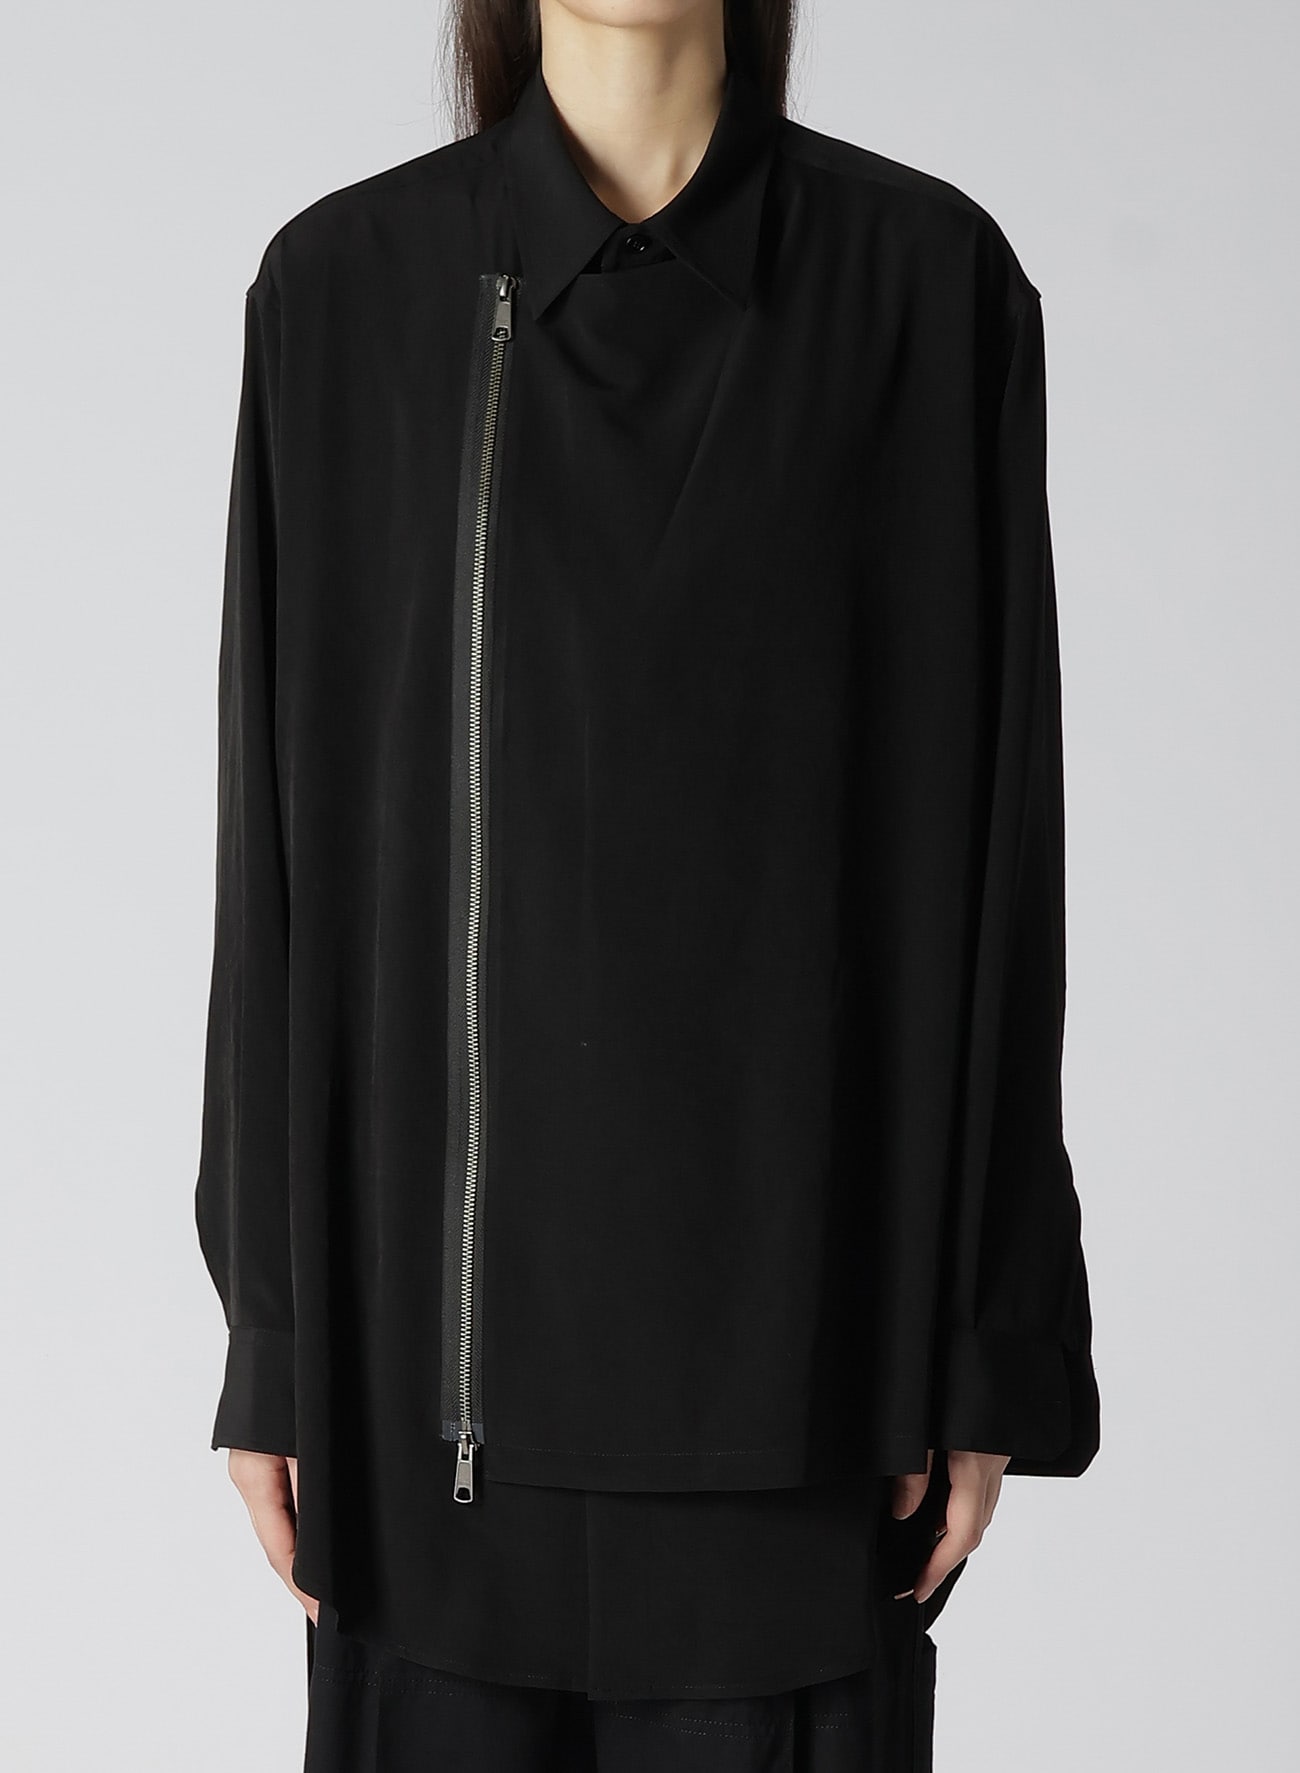 TRIACETATE/POLYESTER CREPE de CHINE LEFT DOUBLE LAYERED SHIRT